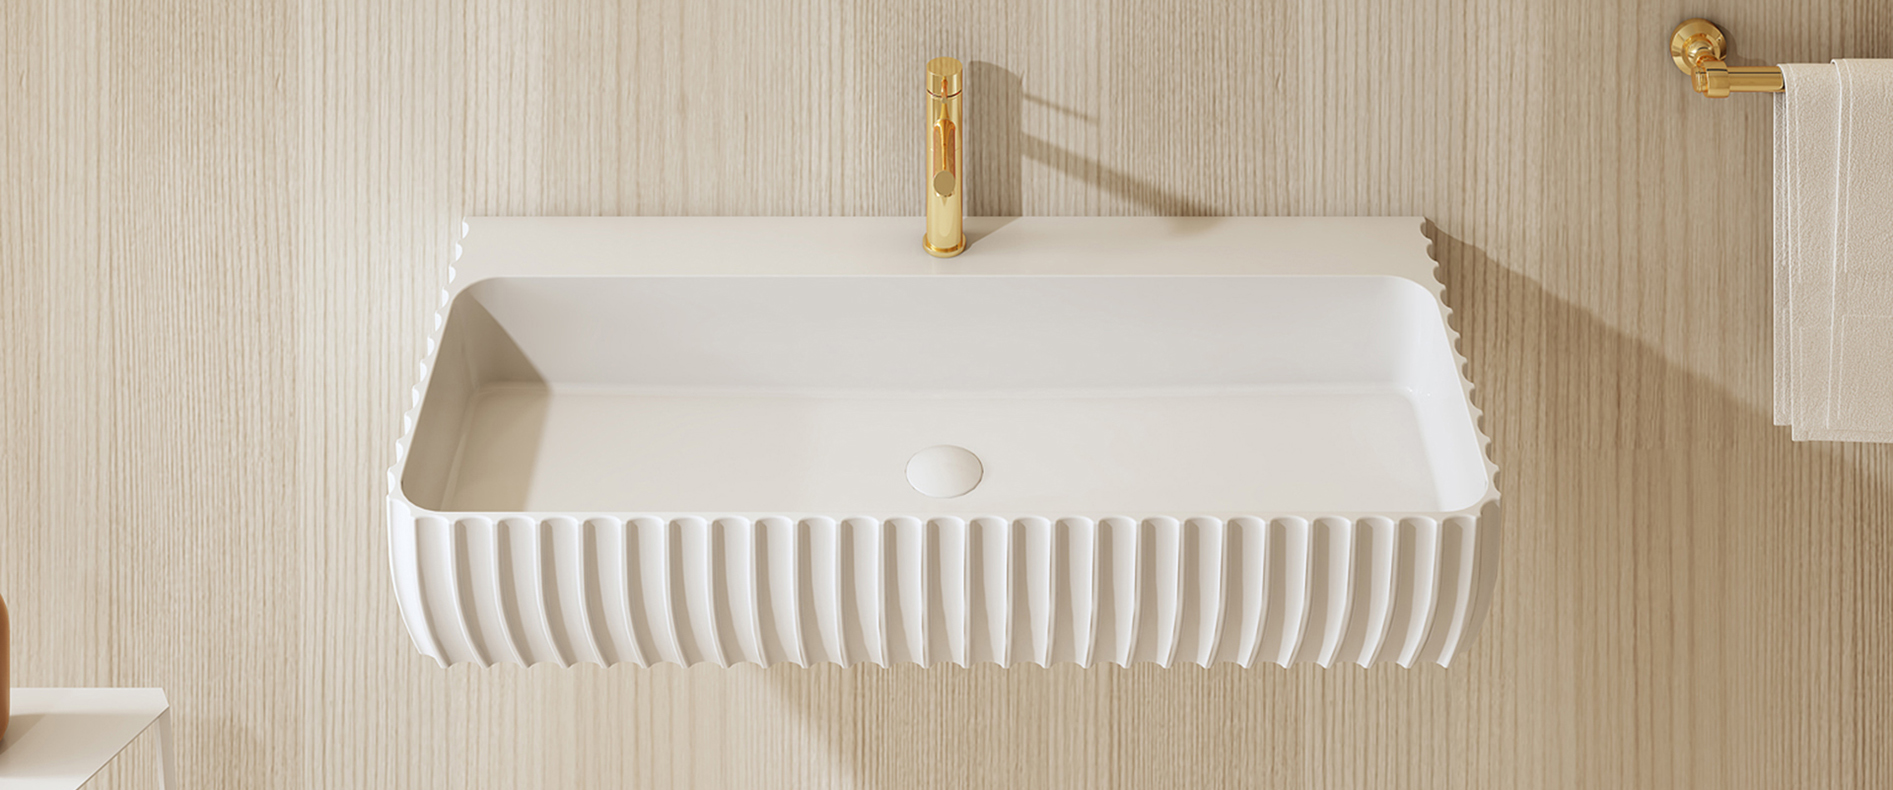 Wall Hung Wash Basin: Everything You Need To Know About